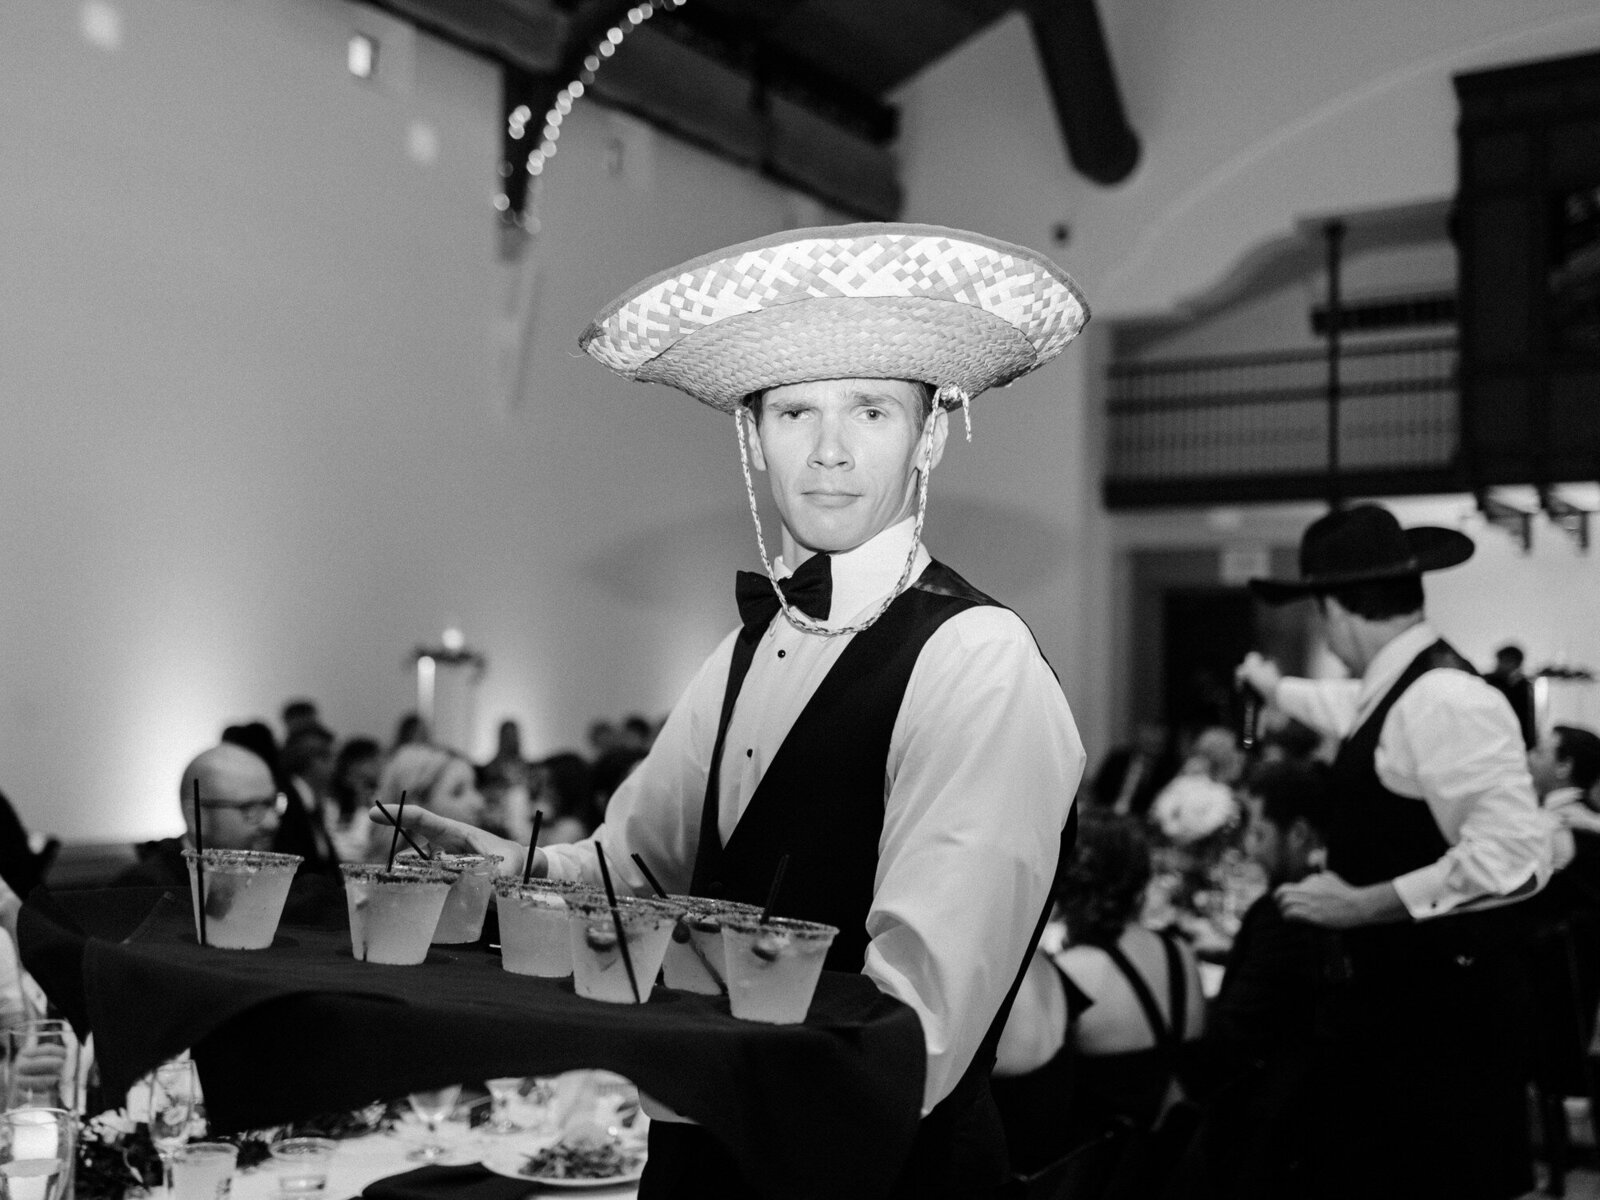 This image was taken at a wedding hosted at the McNay art museum.  One of the groomsmen walks through the reception hall carrying a tray of drinks, wearing a sombrero. He is looking straight into the camera.